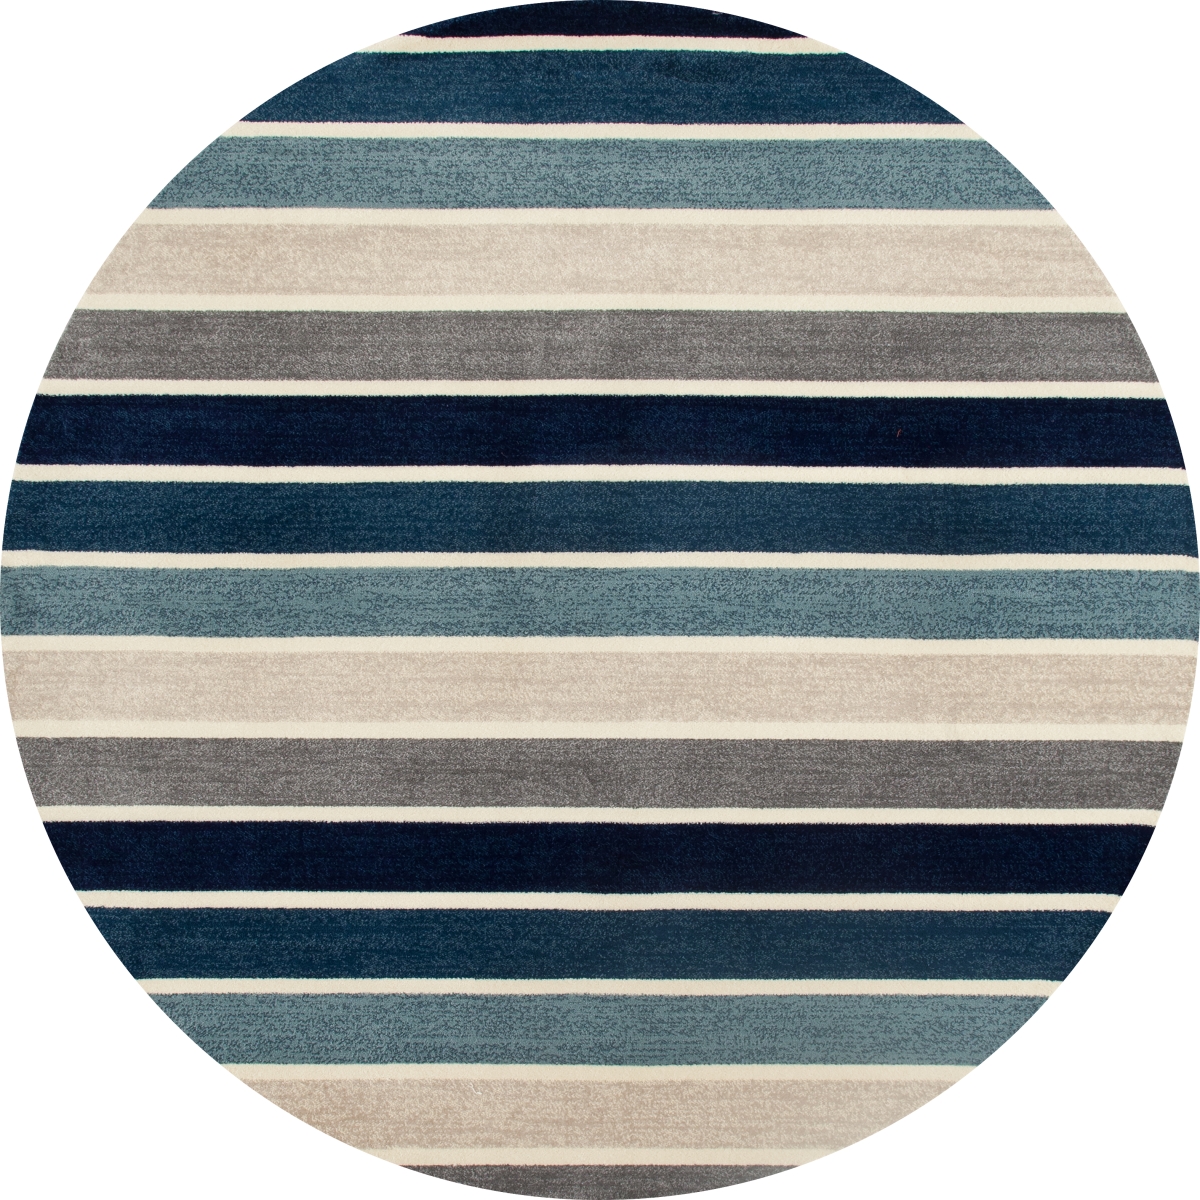 25634 8 Ft. Troy Collection Mainline Woven Round Area Rug, Blue